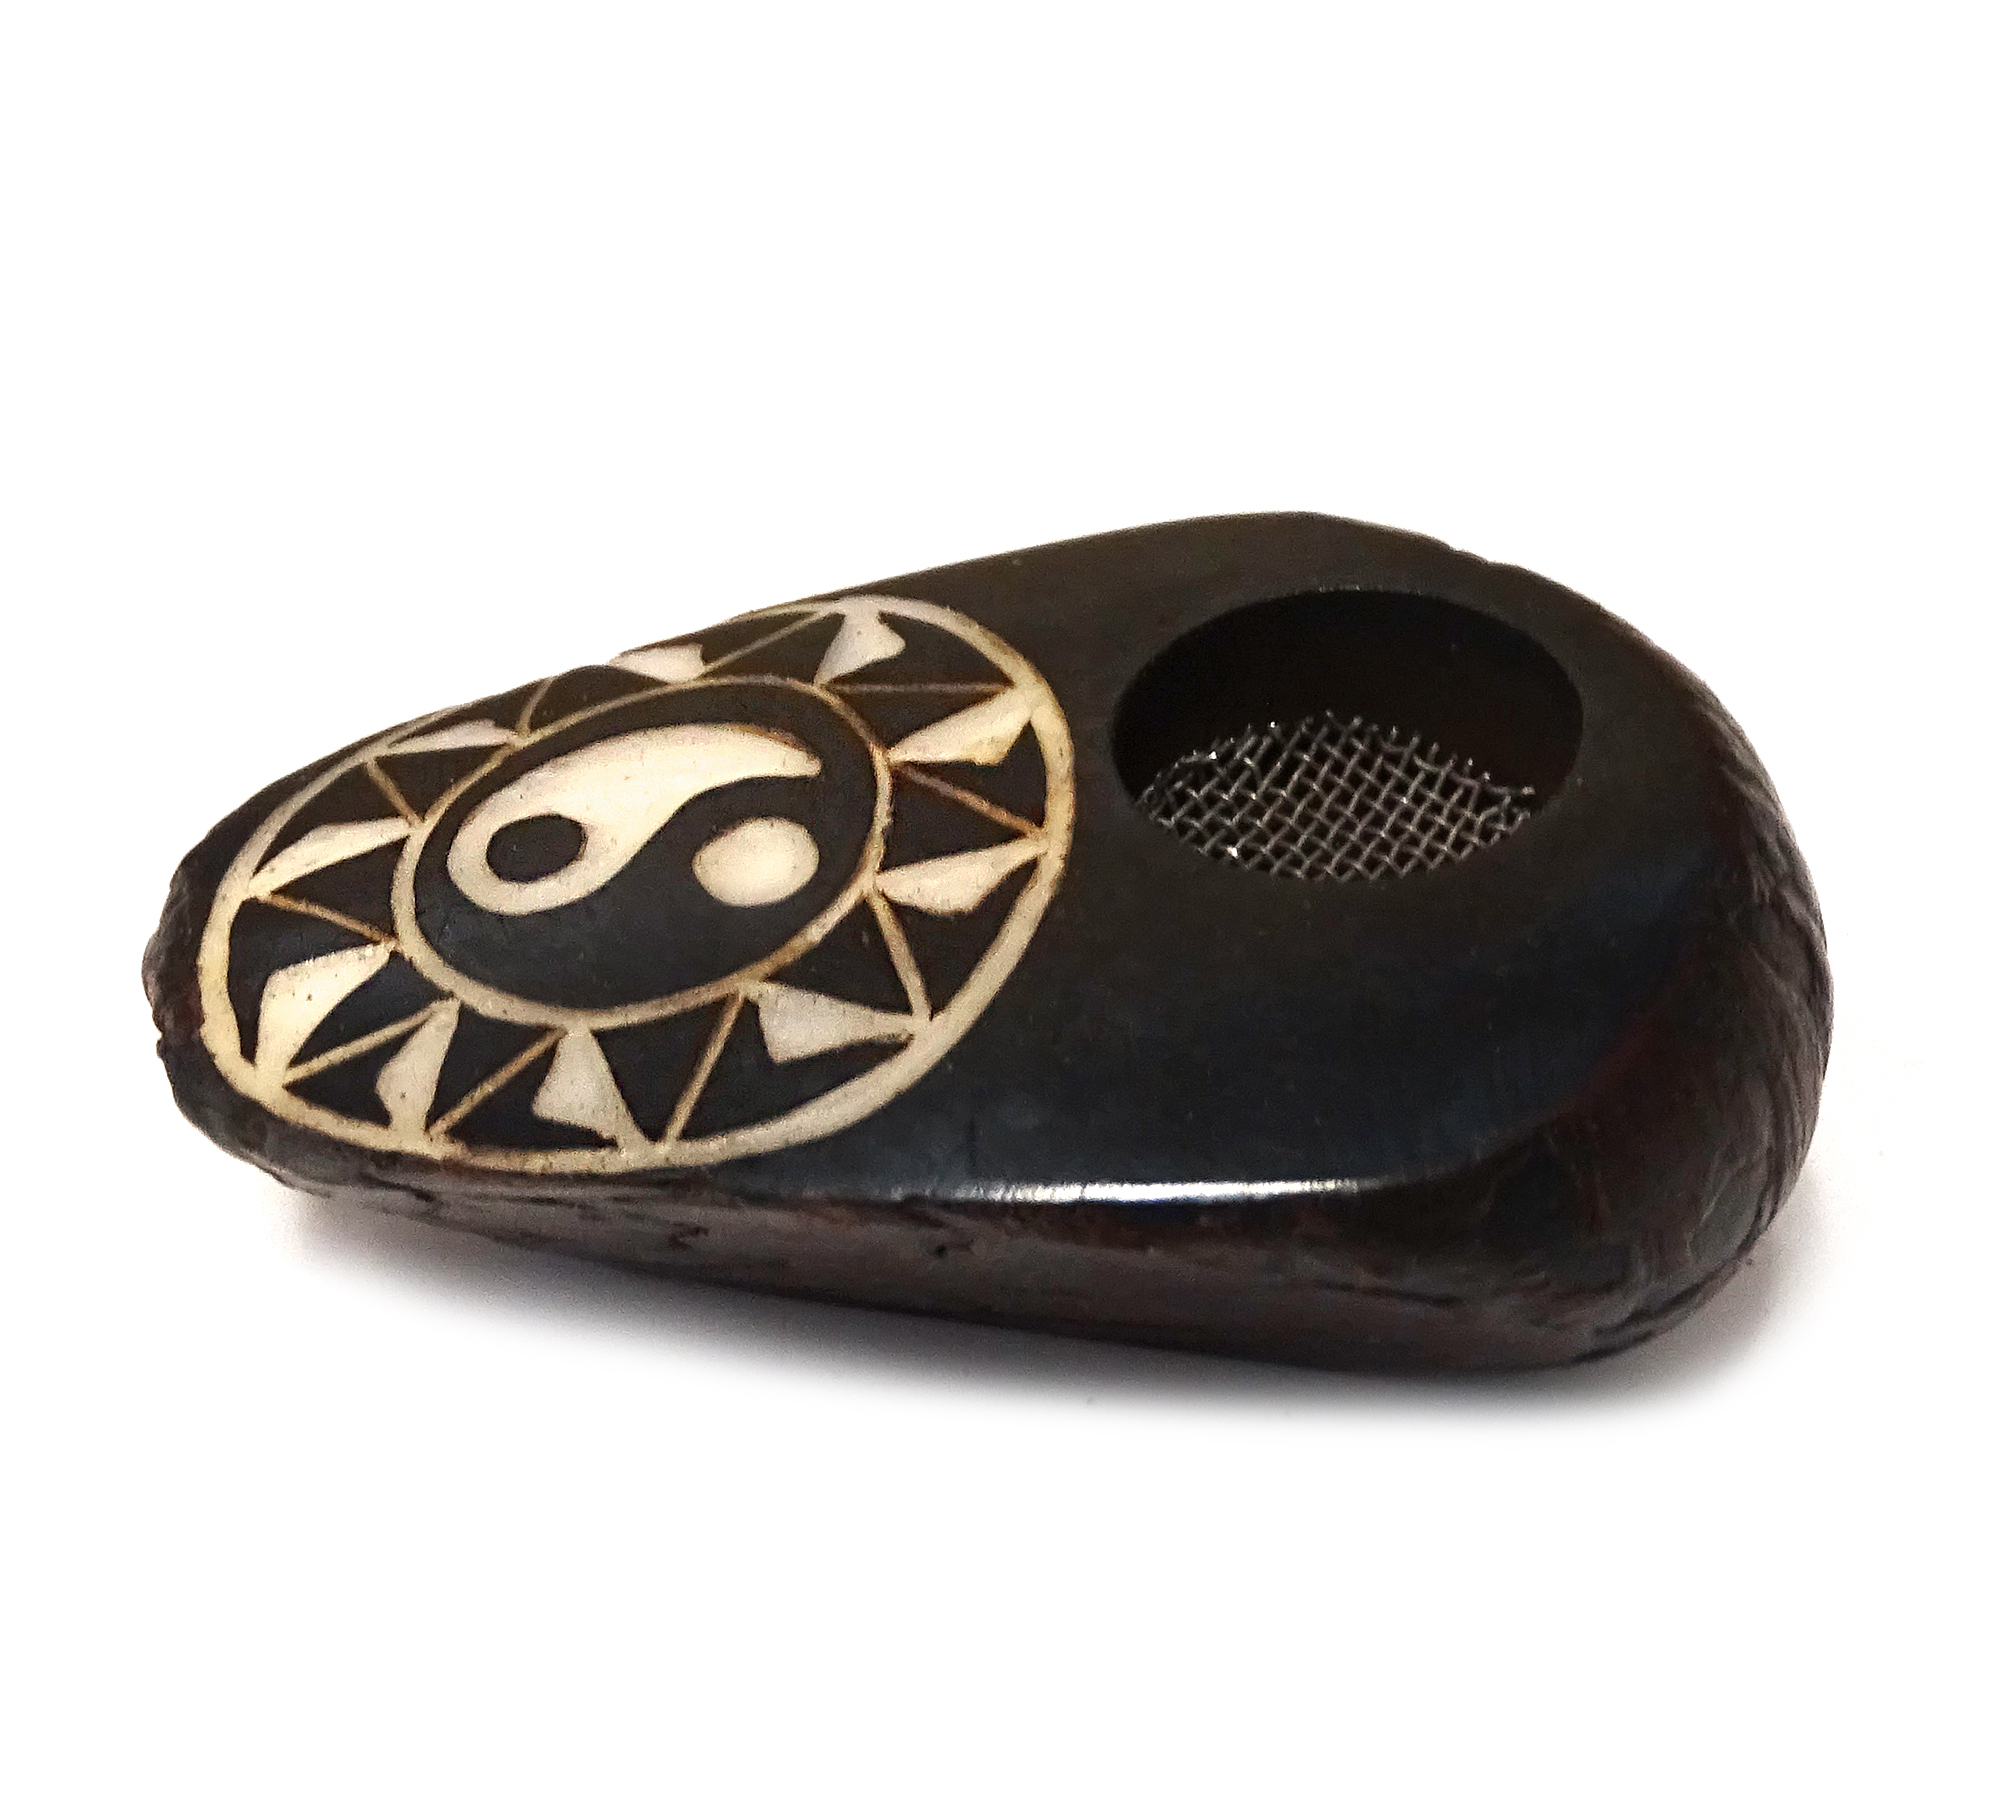 Handcarved tobacco smoking mini round natural tagua nut hand pipe bowl of a yin yang symbol inside of a tribal sun design.